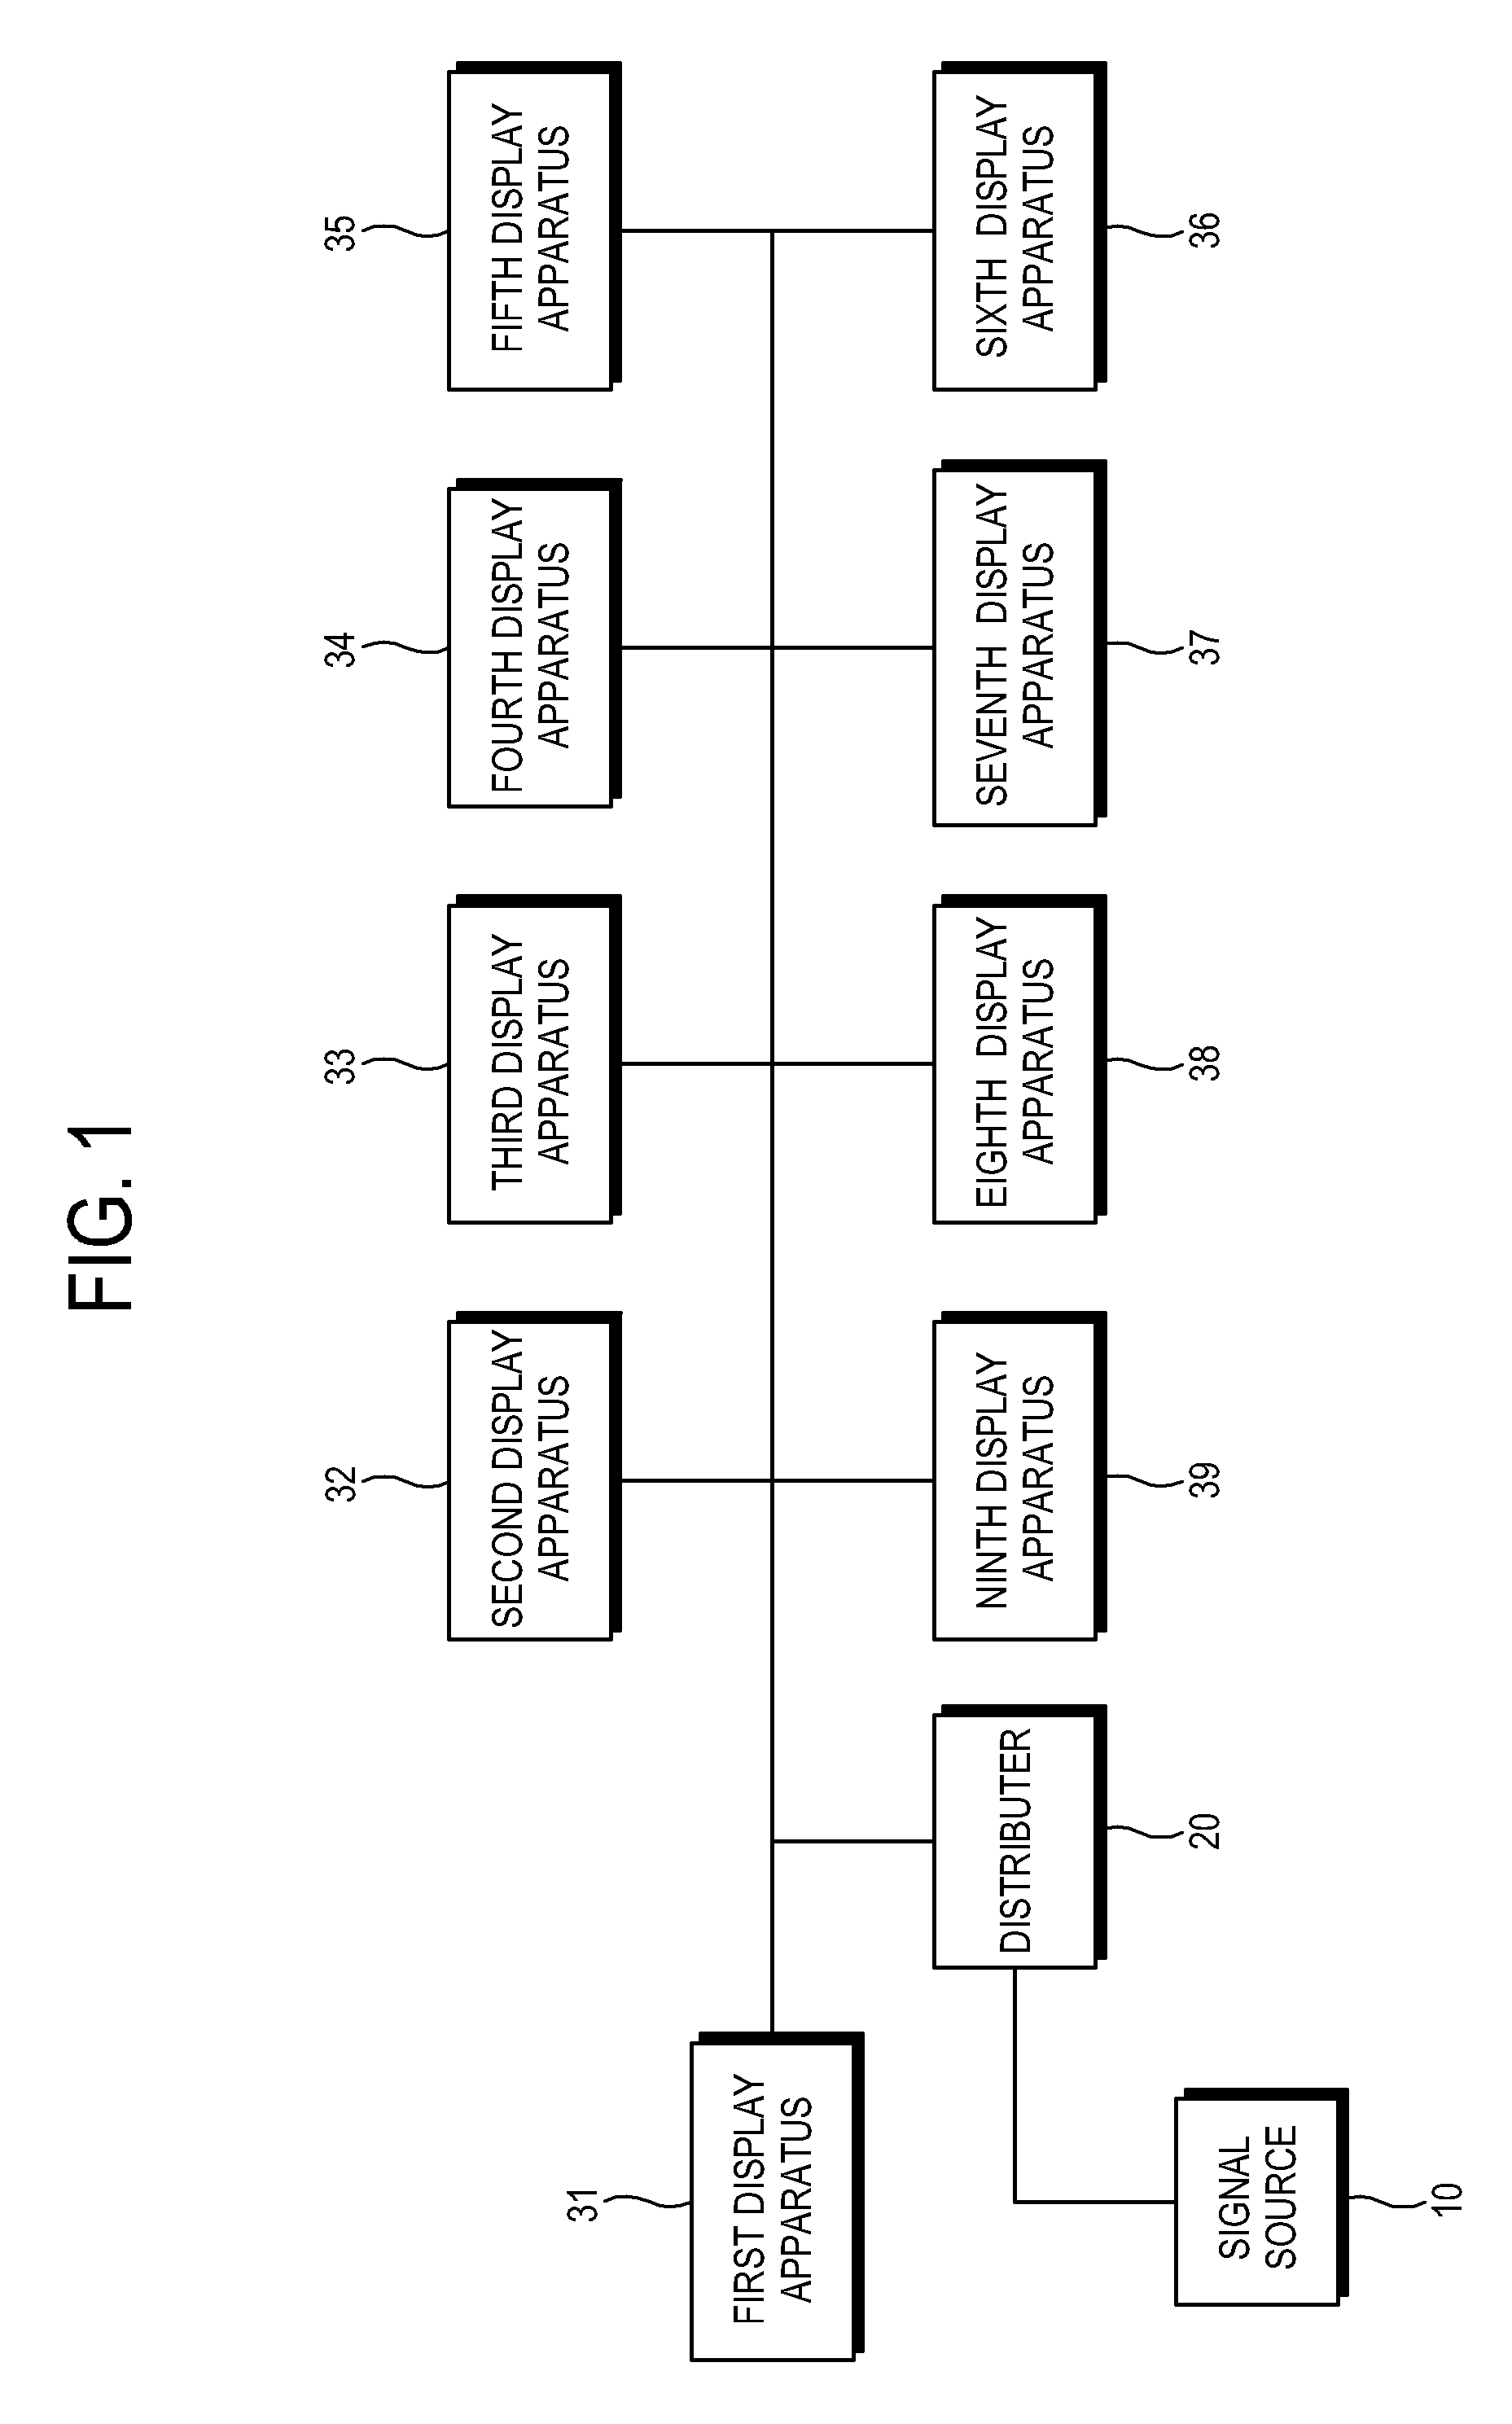 Display system for outputting analog and digital signals to a plurality of display apparatuses, system and method